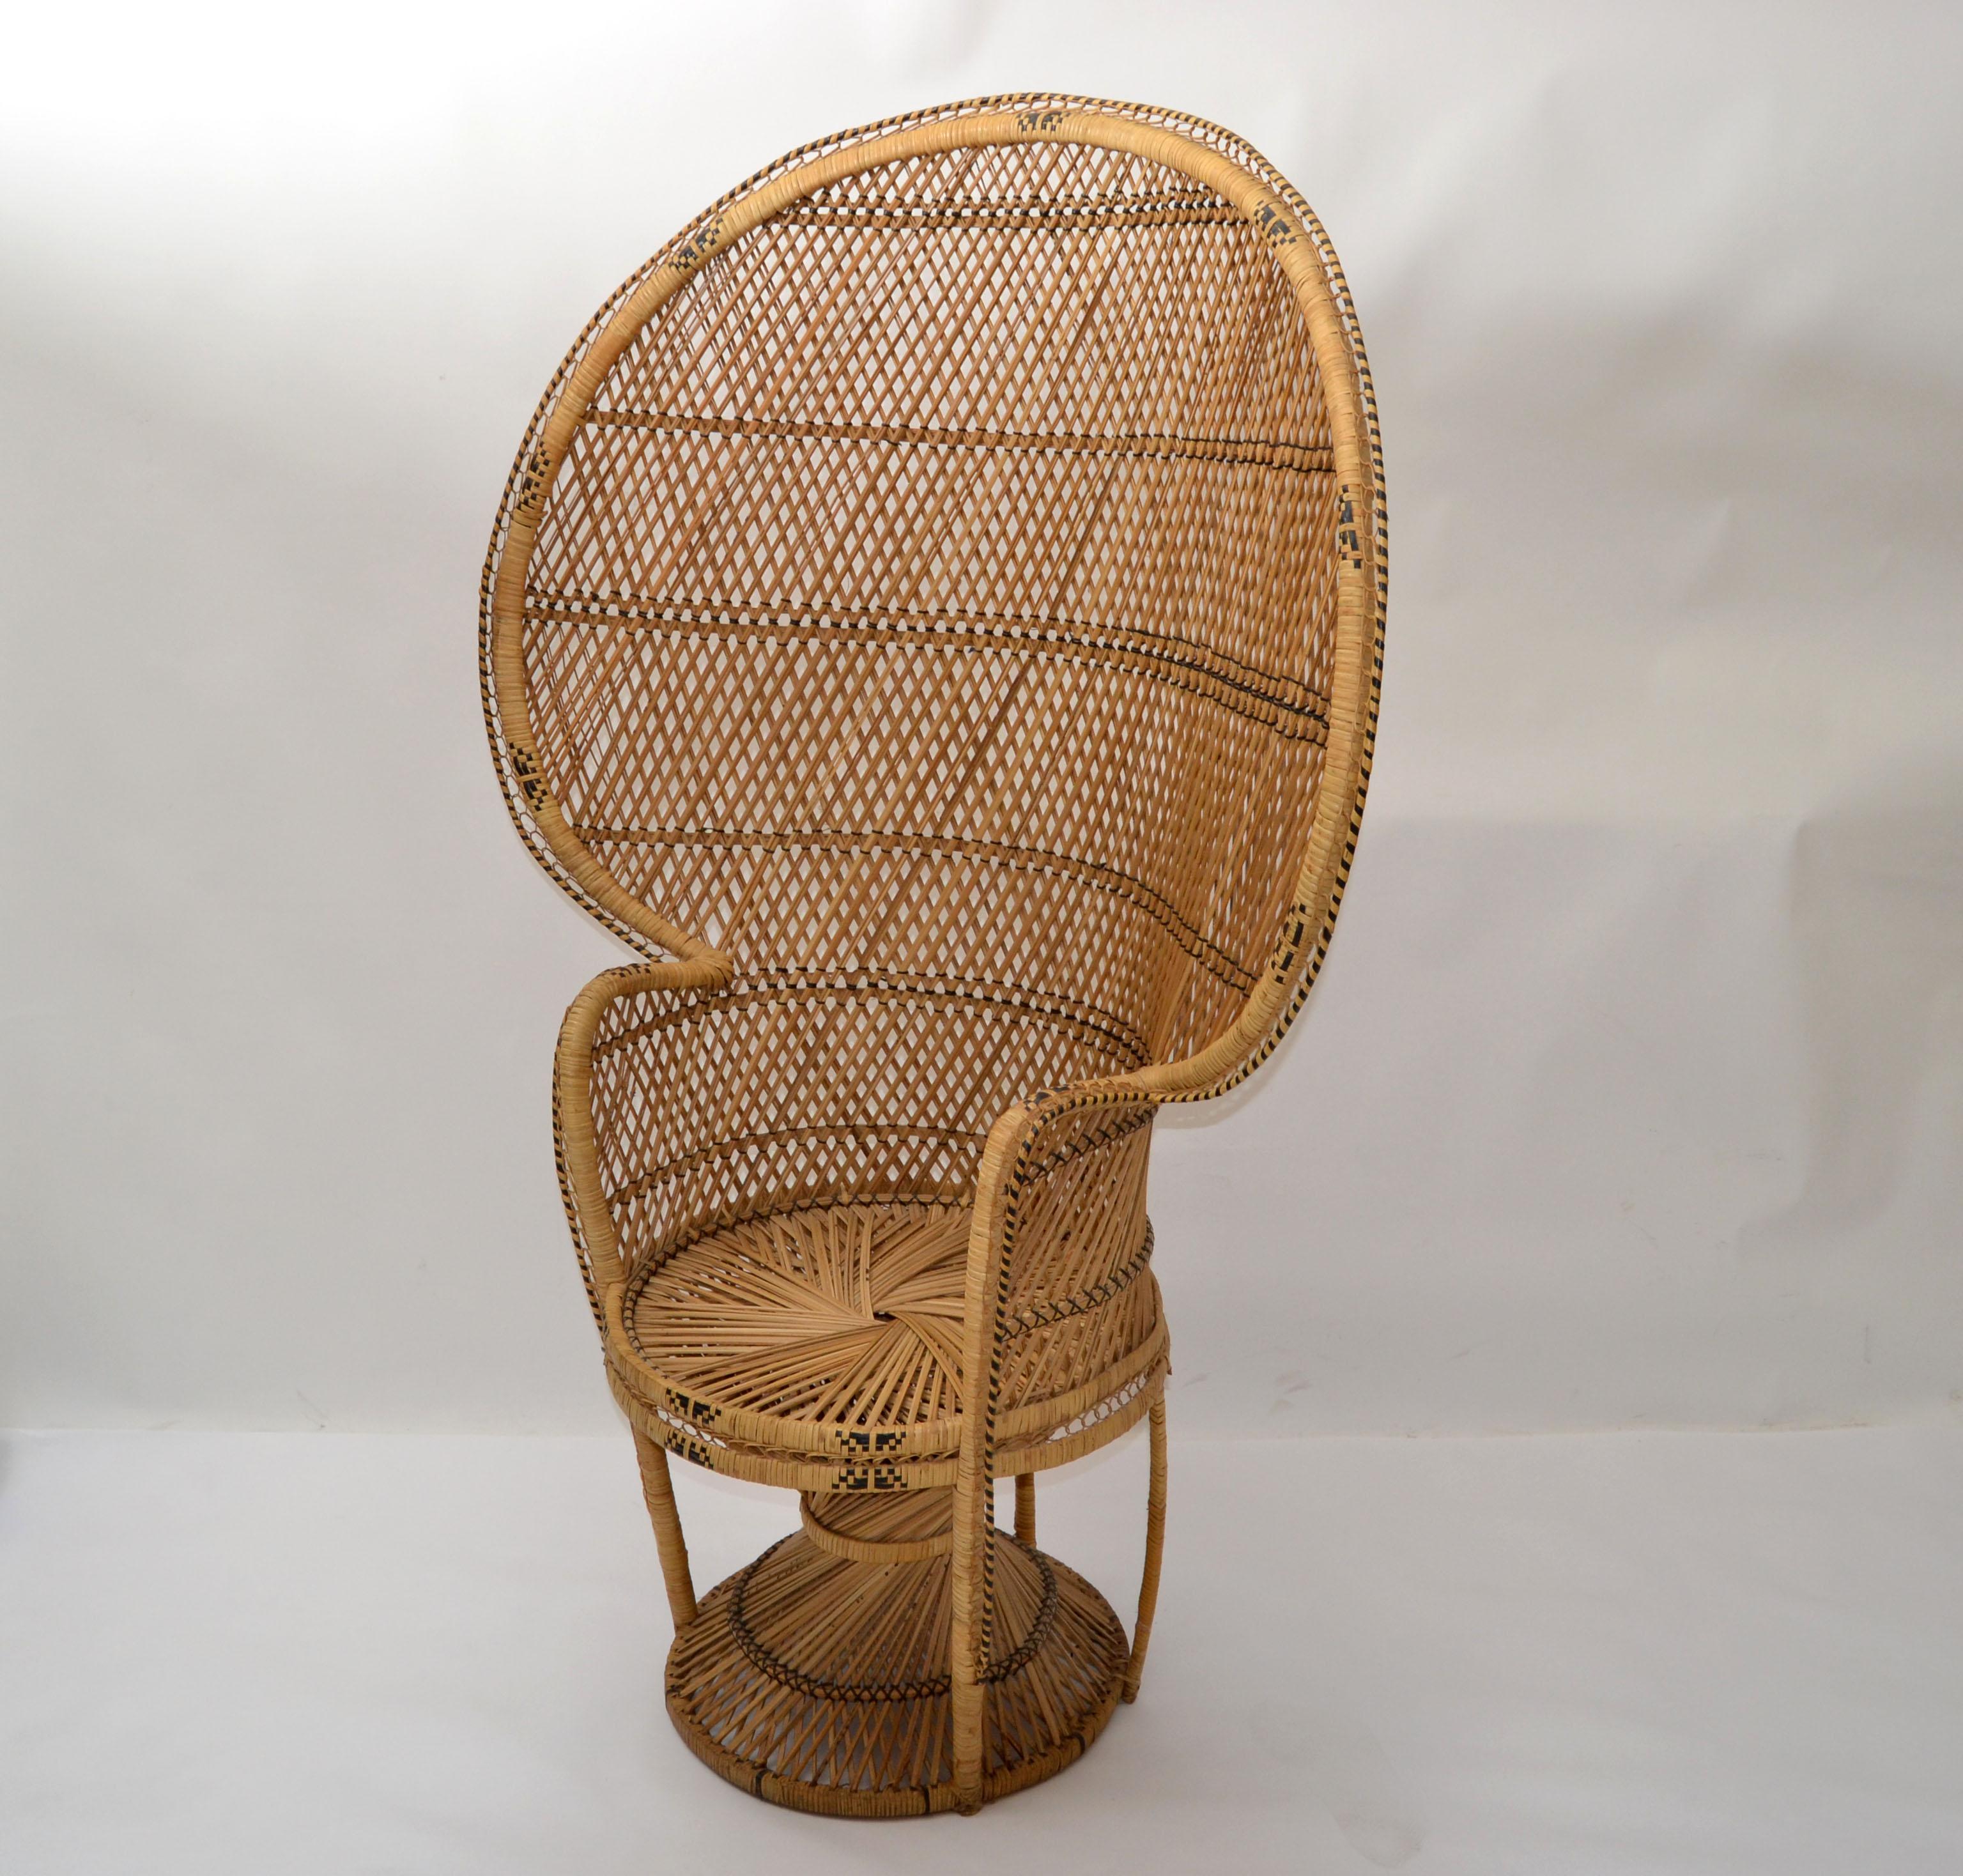 vintage wicker chairs for sale